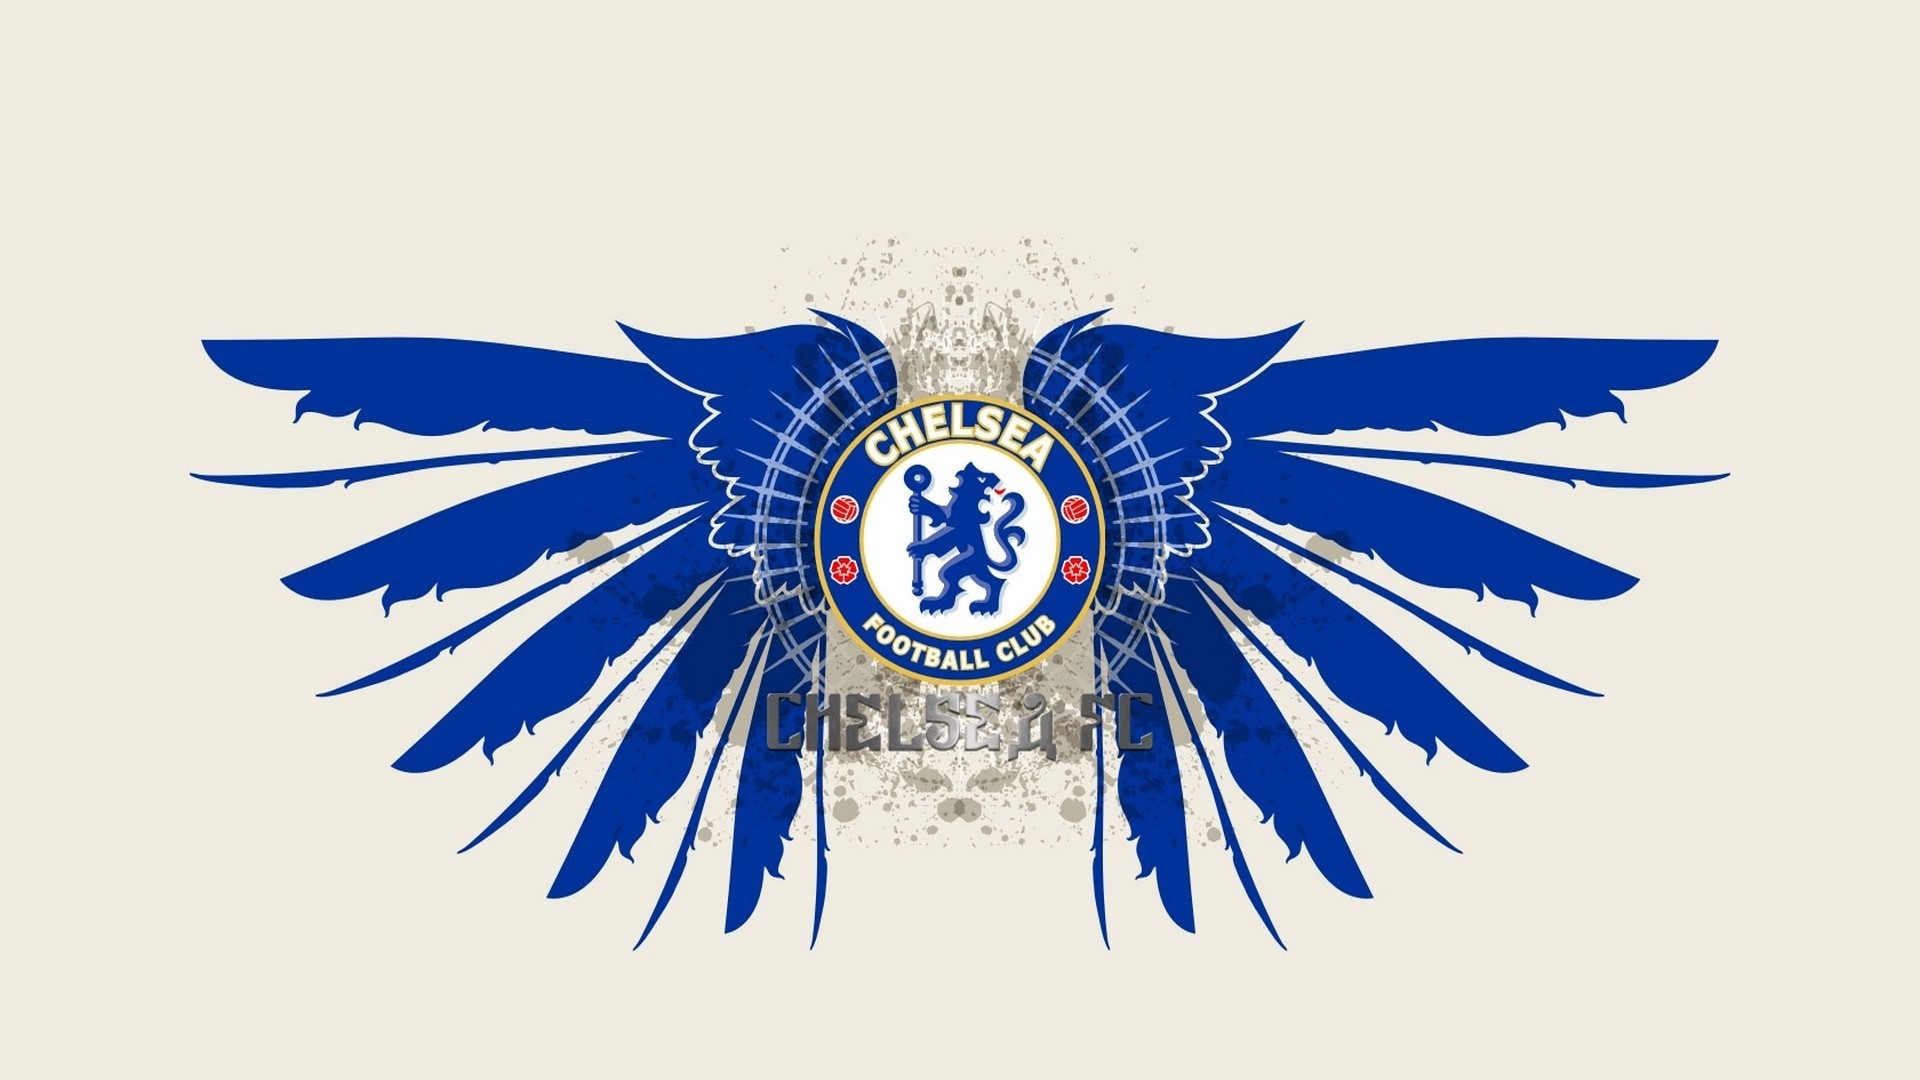 Chelsea Wallpaper 2018 HD (best Chelsea Wallpaper 2018 HD and image) on WallpaperChat